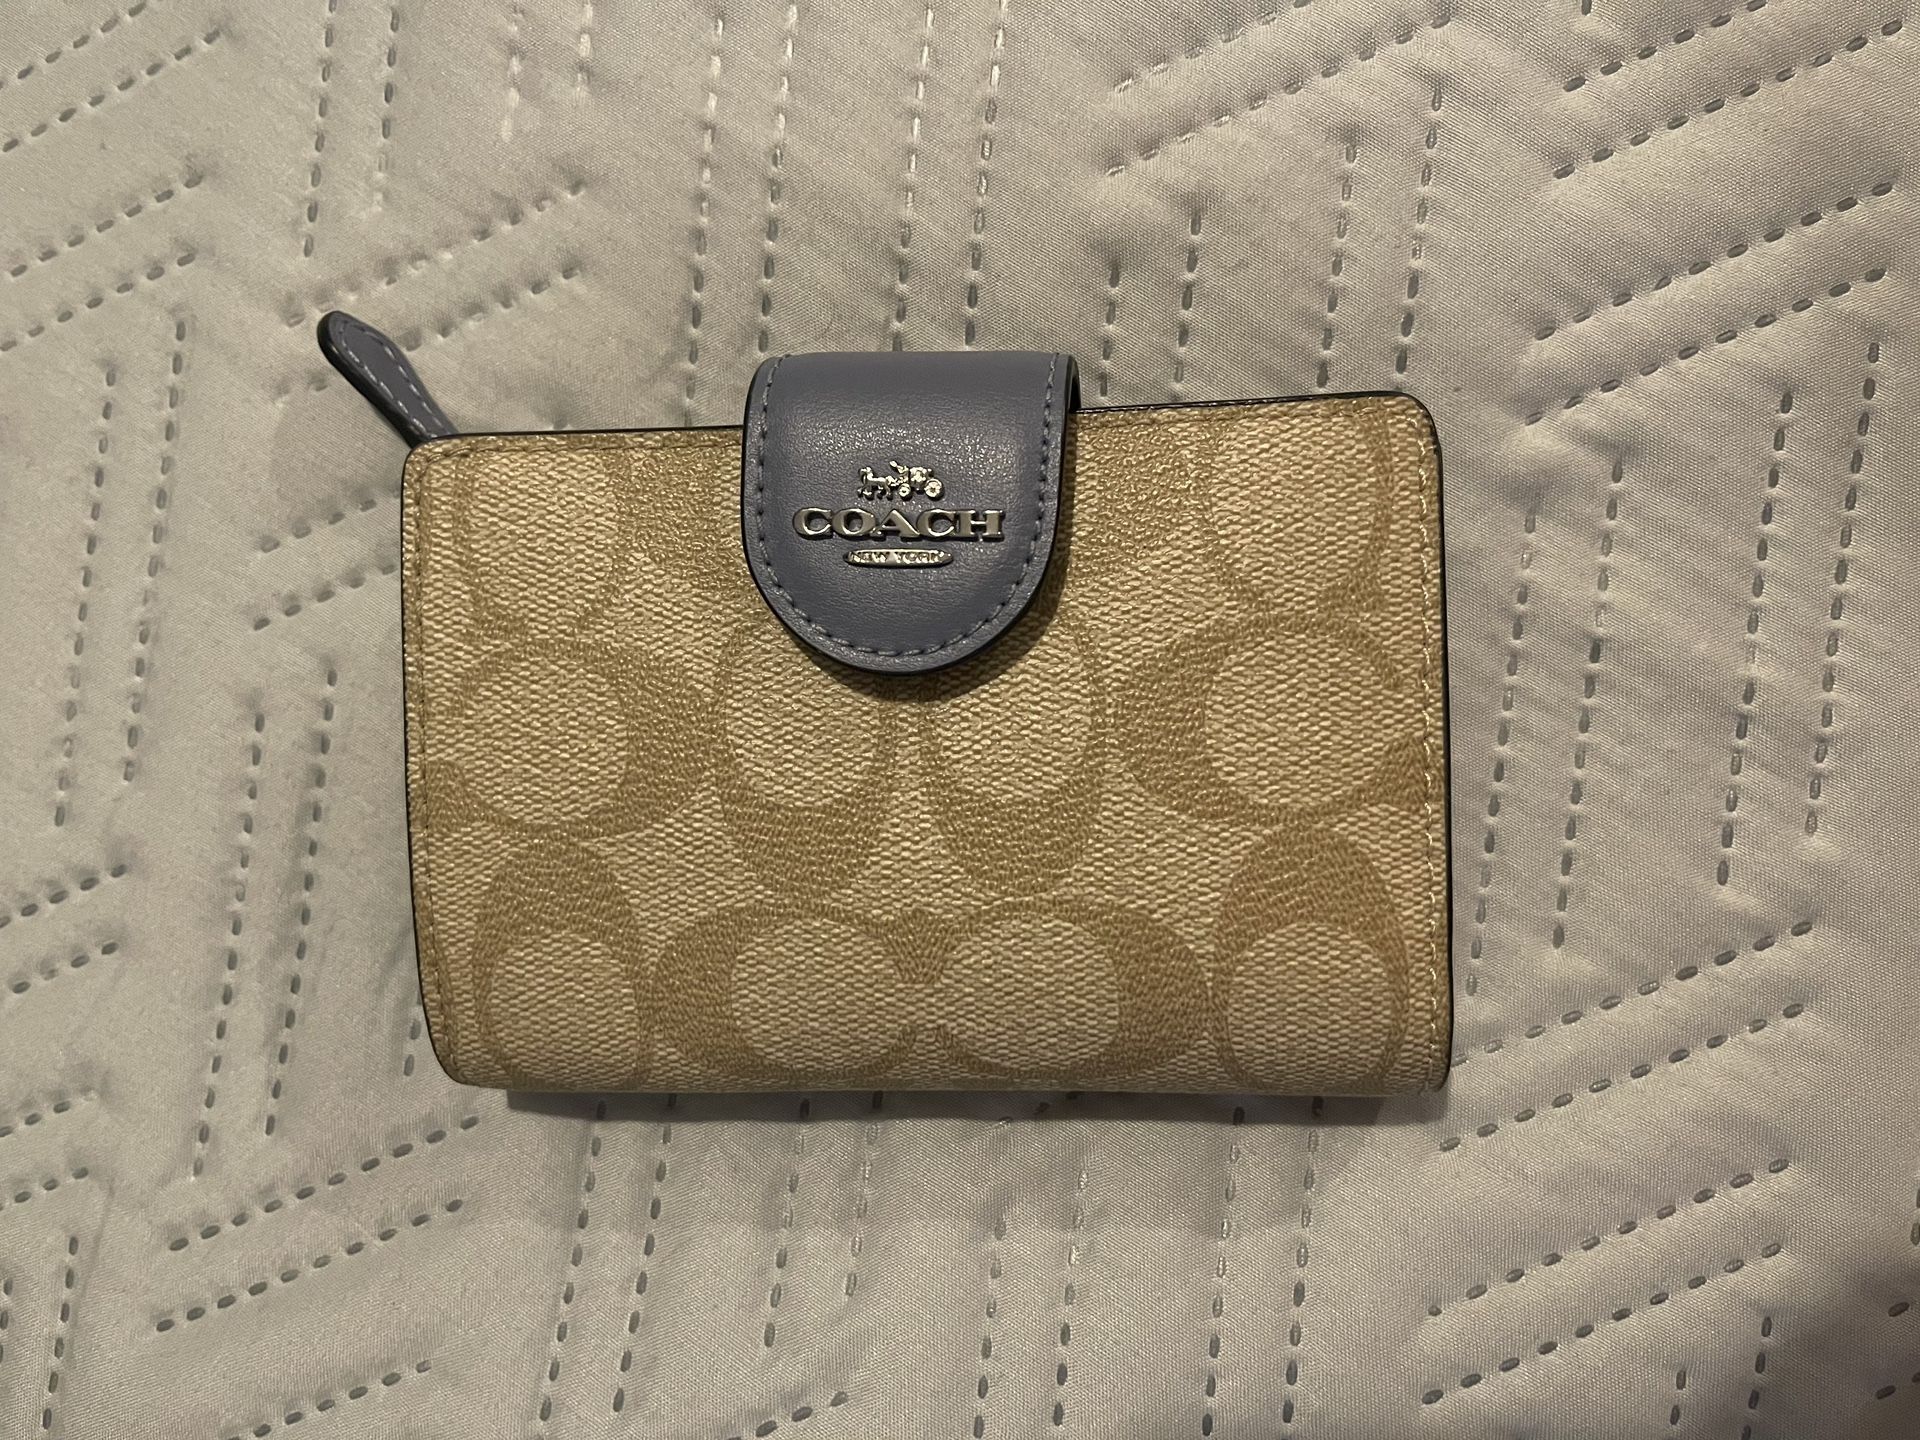 Coach - Small Trifold Wallet for Sale in Mount Vernon, WA - OfferUp